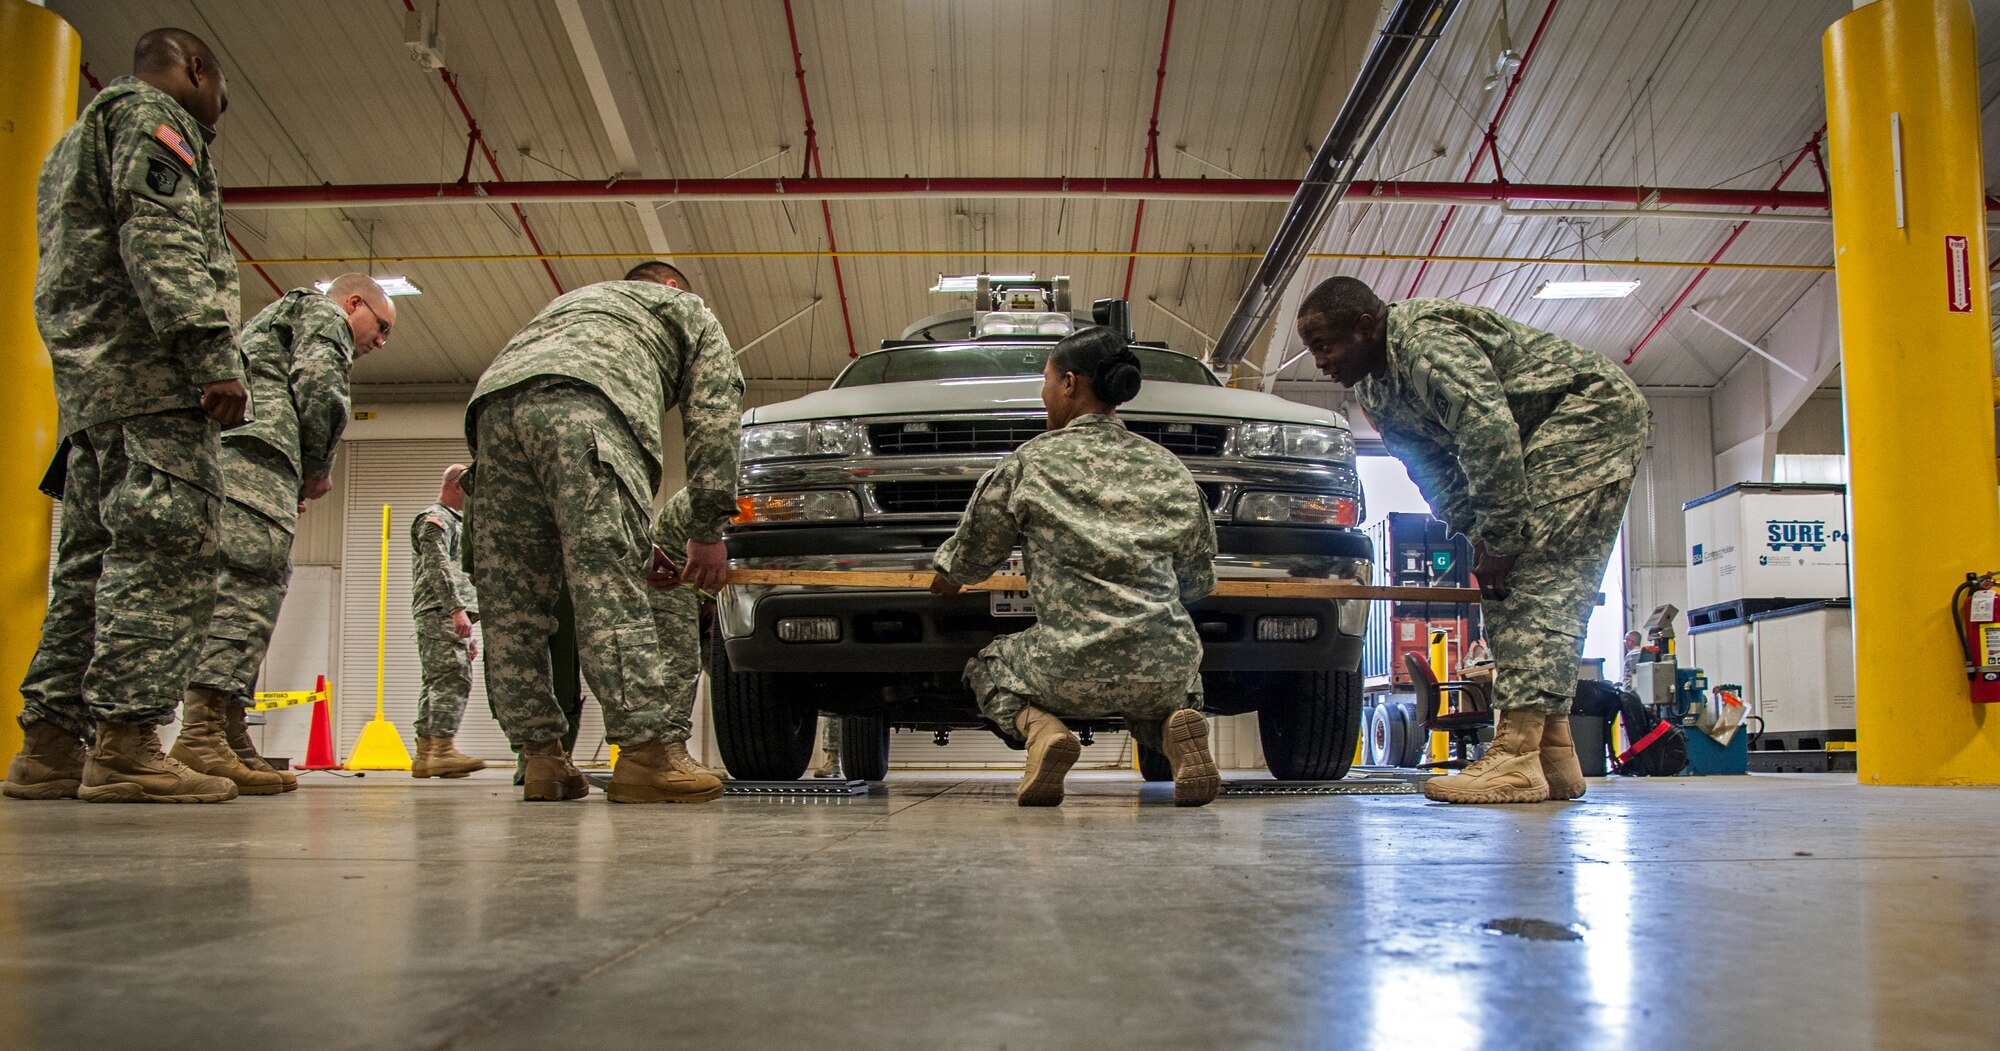 Joint Base McGuire-Dix-Lakehurst mobility specialists measure the front end of a sport utility vehicle   during a joint exercise at Joint Base McGuire-Dix-Lakehurst, N.J., Feb. 12, 2015. The specialists comprised of Army, Air Force and Federal Emergency Management Agency personnel came together to review policies and practices in the event airlift is needed to support a national emergency or crisis. (U.S. Air Force photo by Staff Sgt. Scott Saldukas/Released)